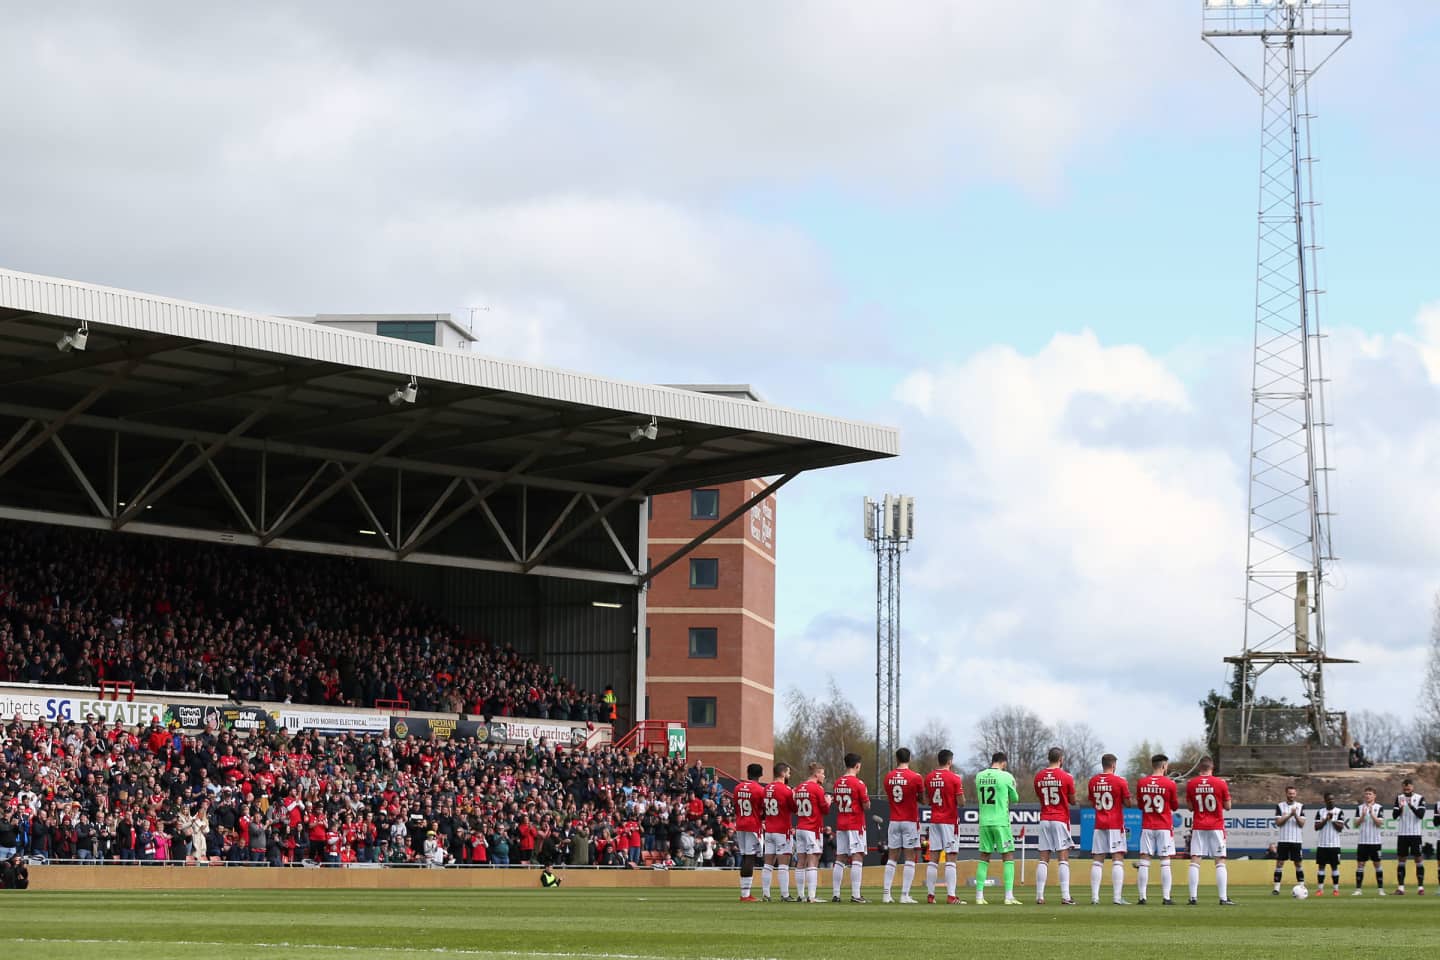 Wrexham FC Tickets Buy or Sell Tickets for Wrexham FC Schedule viagogo